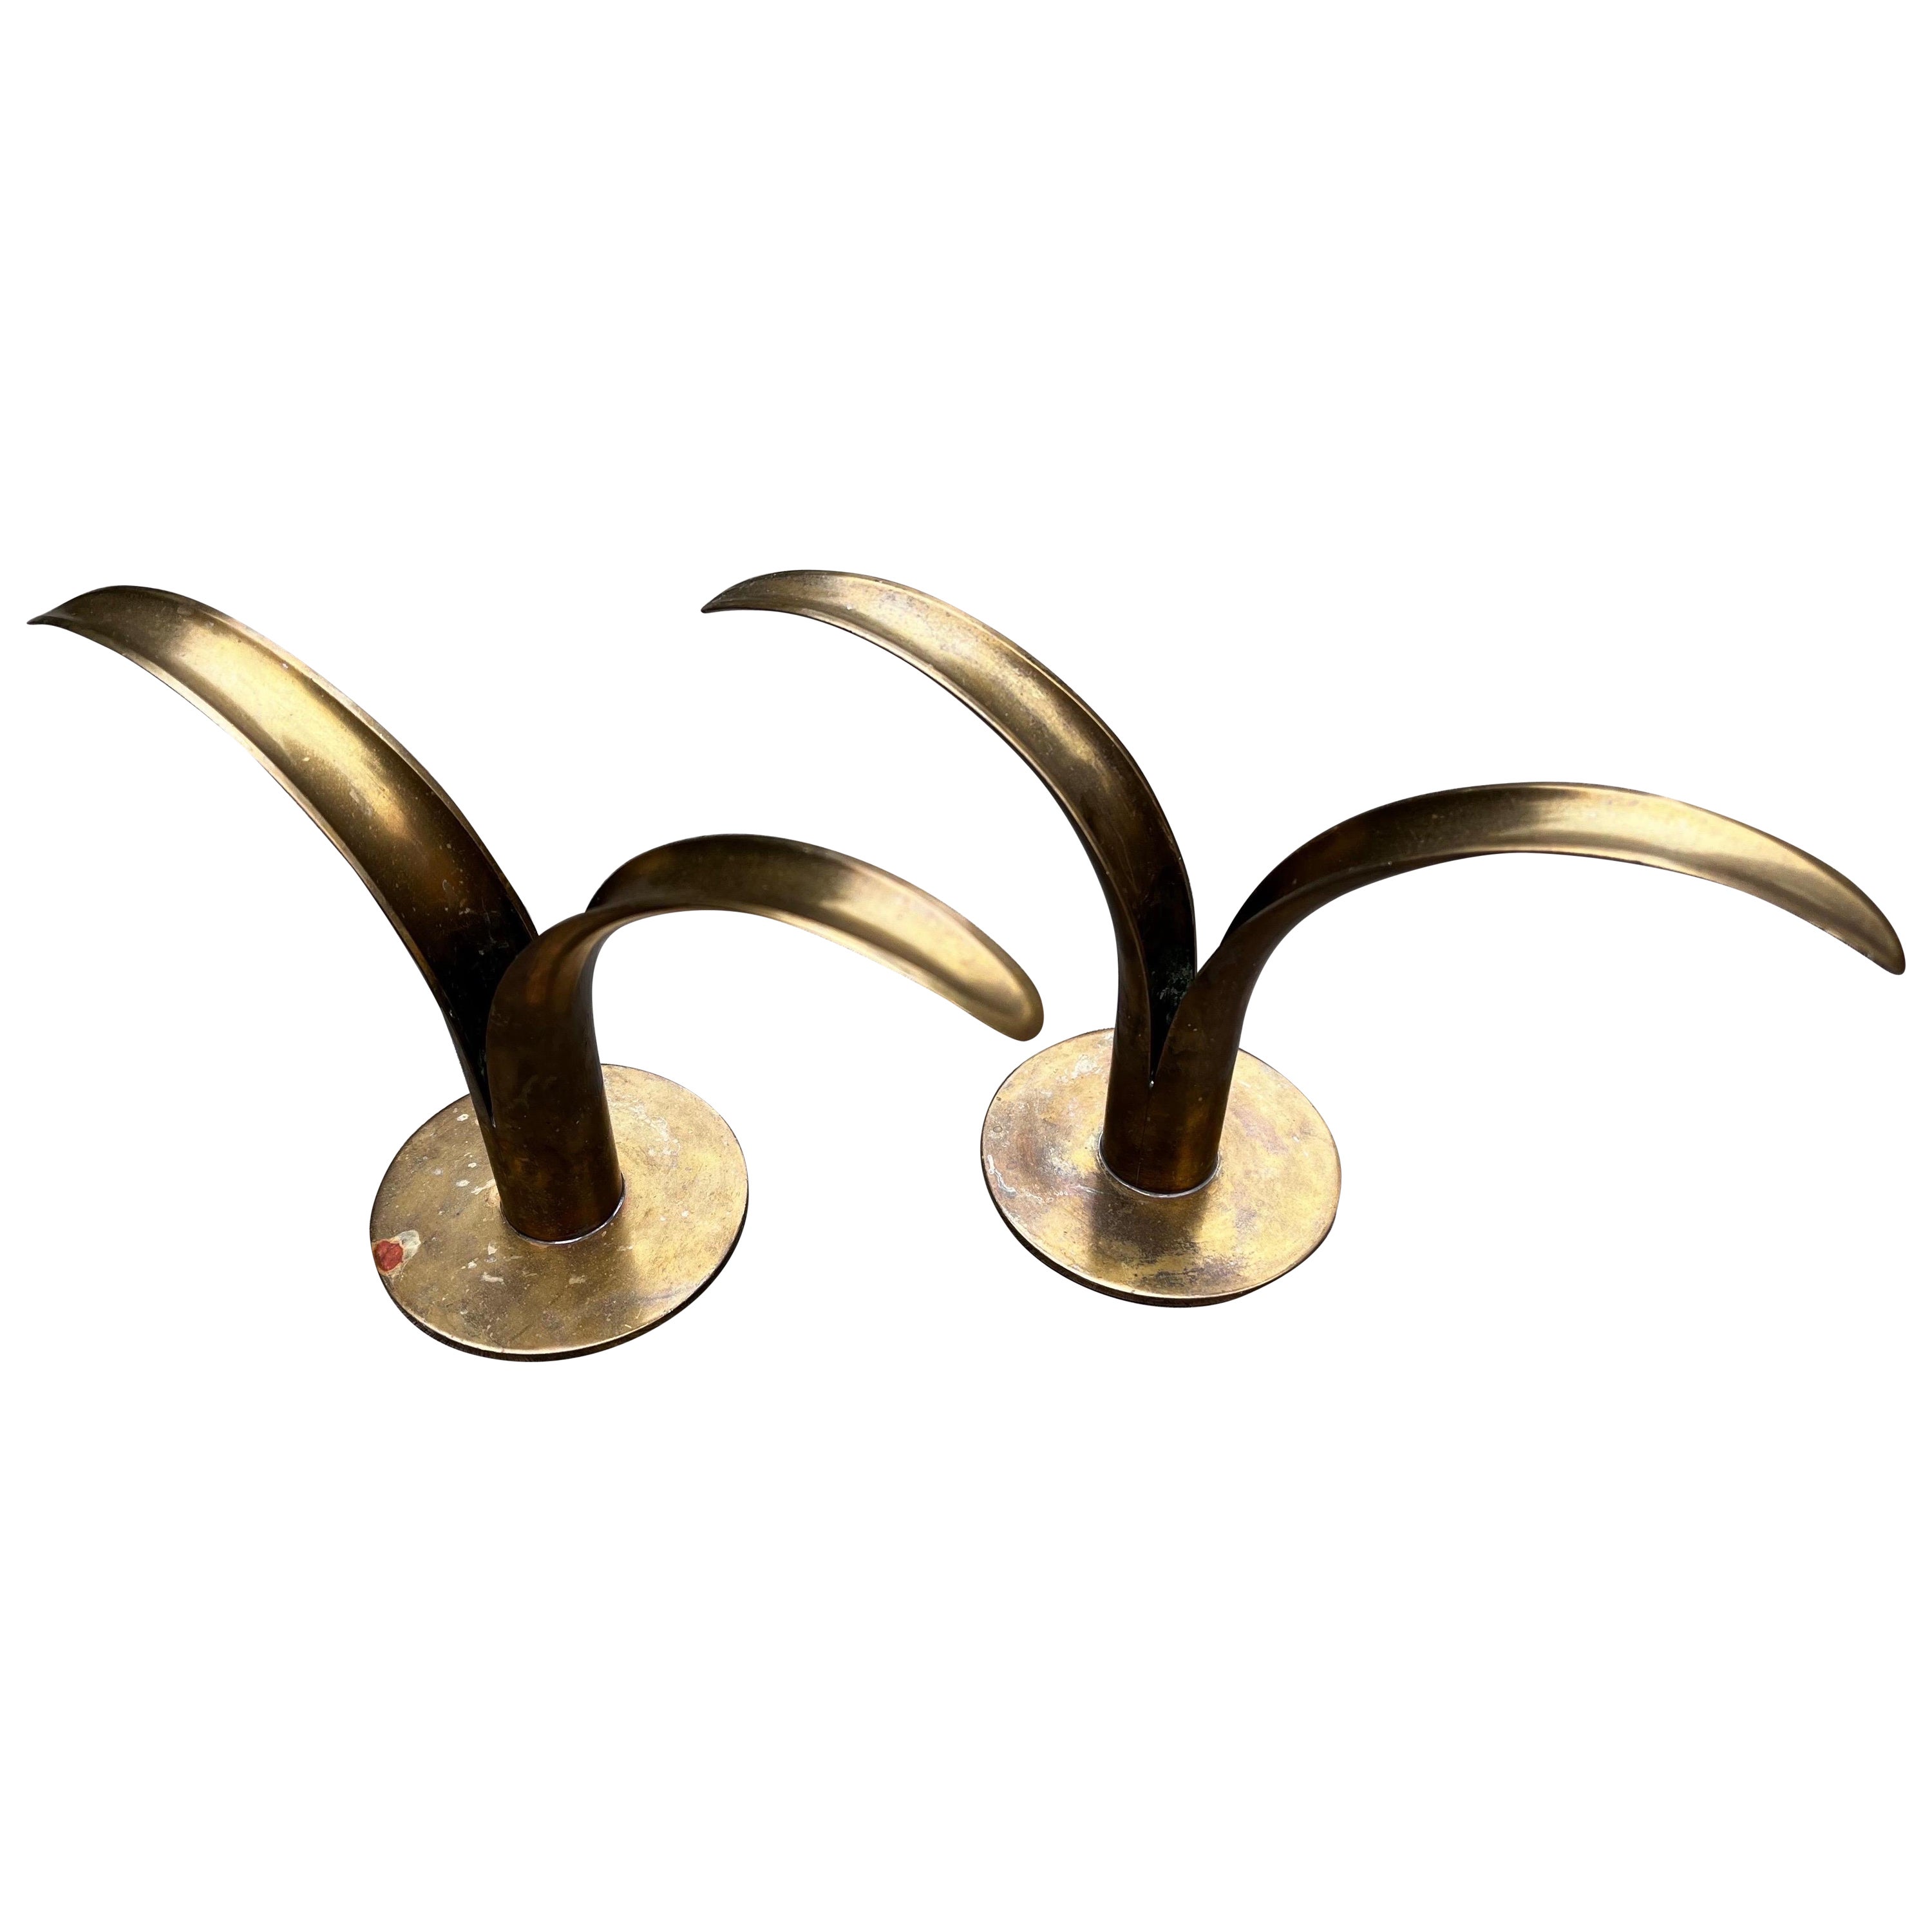 Pair of Swedish Brass Candleholders by Ivar Alenius Bjork for Ystad Metal.  For Sale